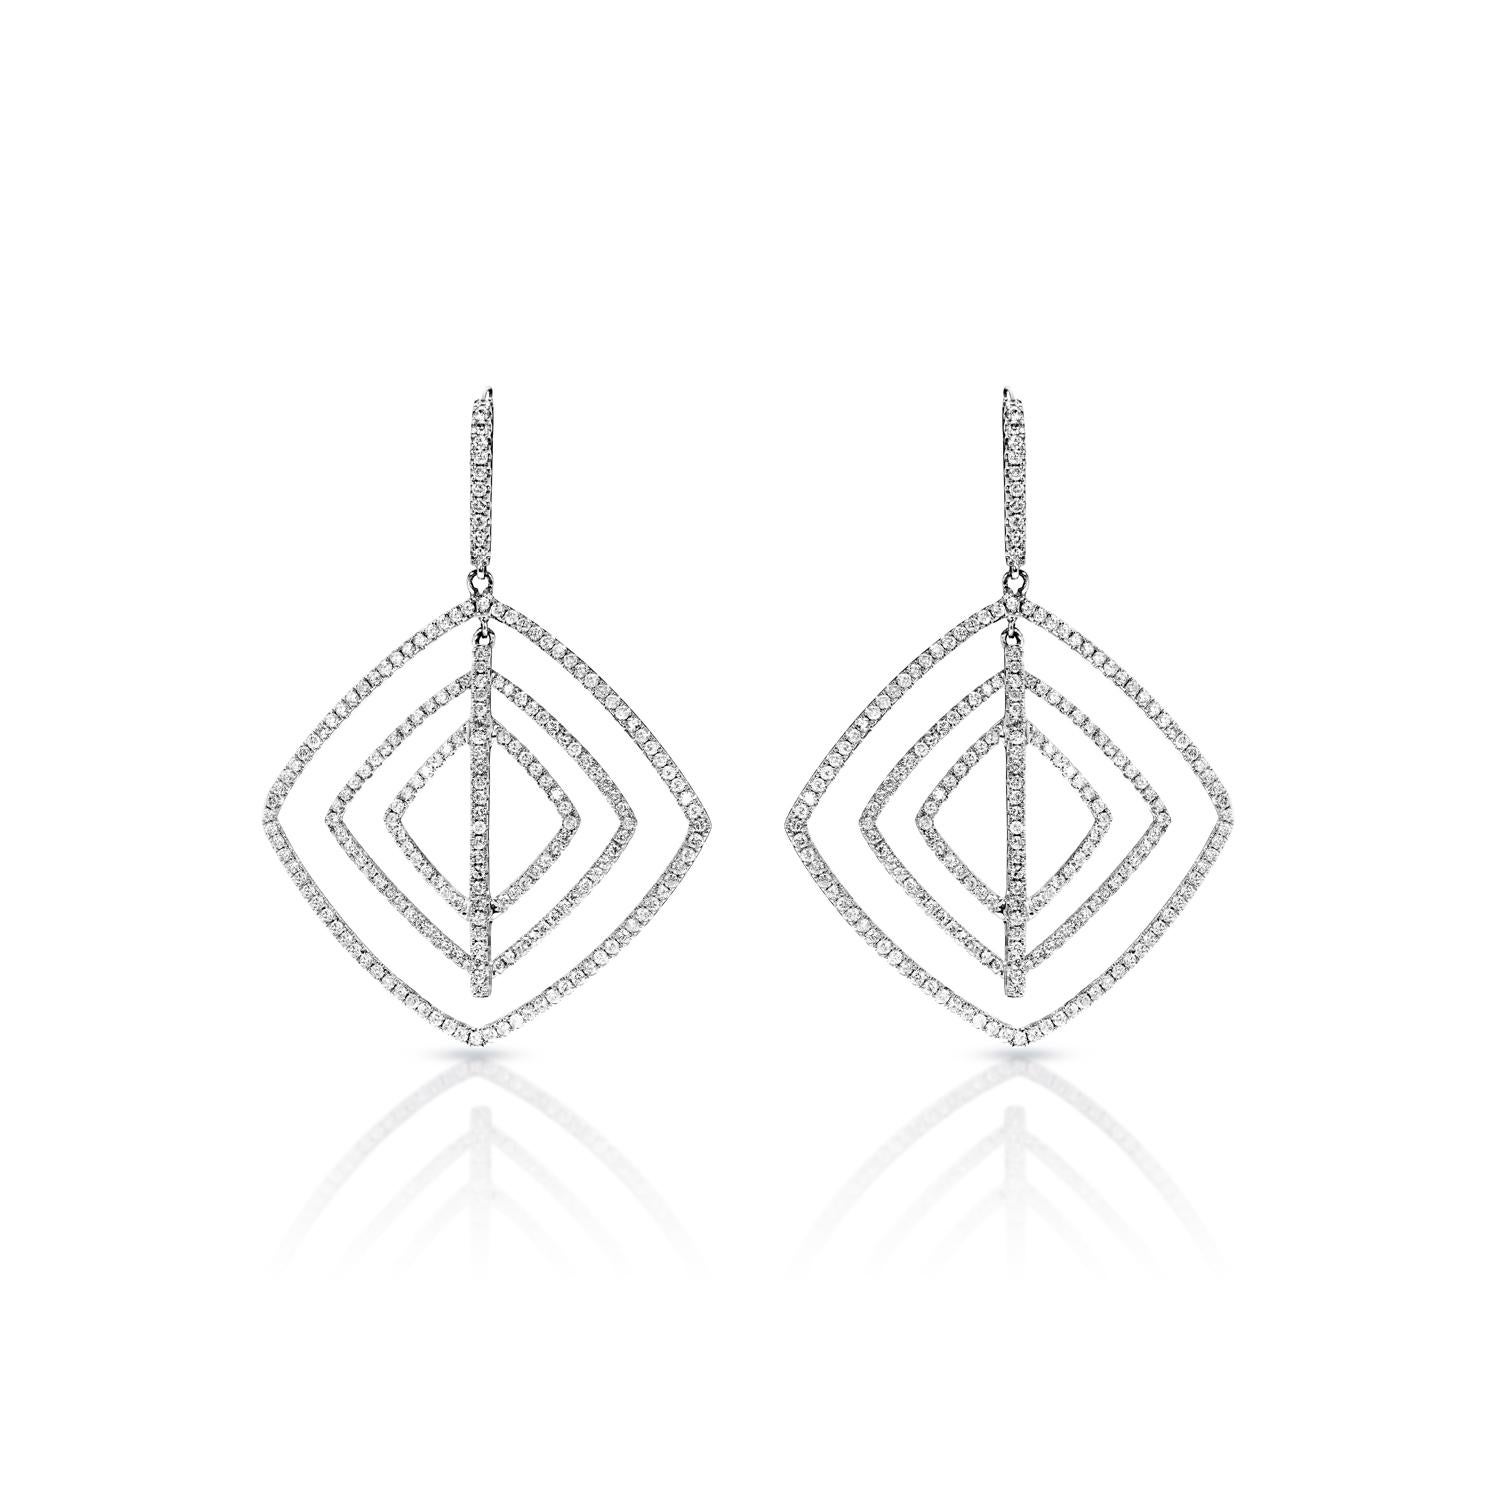 Diamond Hanging Earrings For Ladies:

Main Diamonds:
Carat Weight: 2.66 Carats
Shape: Round Brilliant Cut

Metal: 14k White Gold 10.80 grams
Style: Hanging Earrings

Total Carat Weight: 2.66 Carats